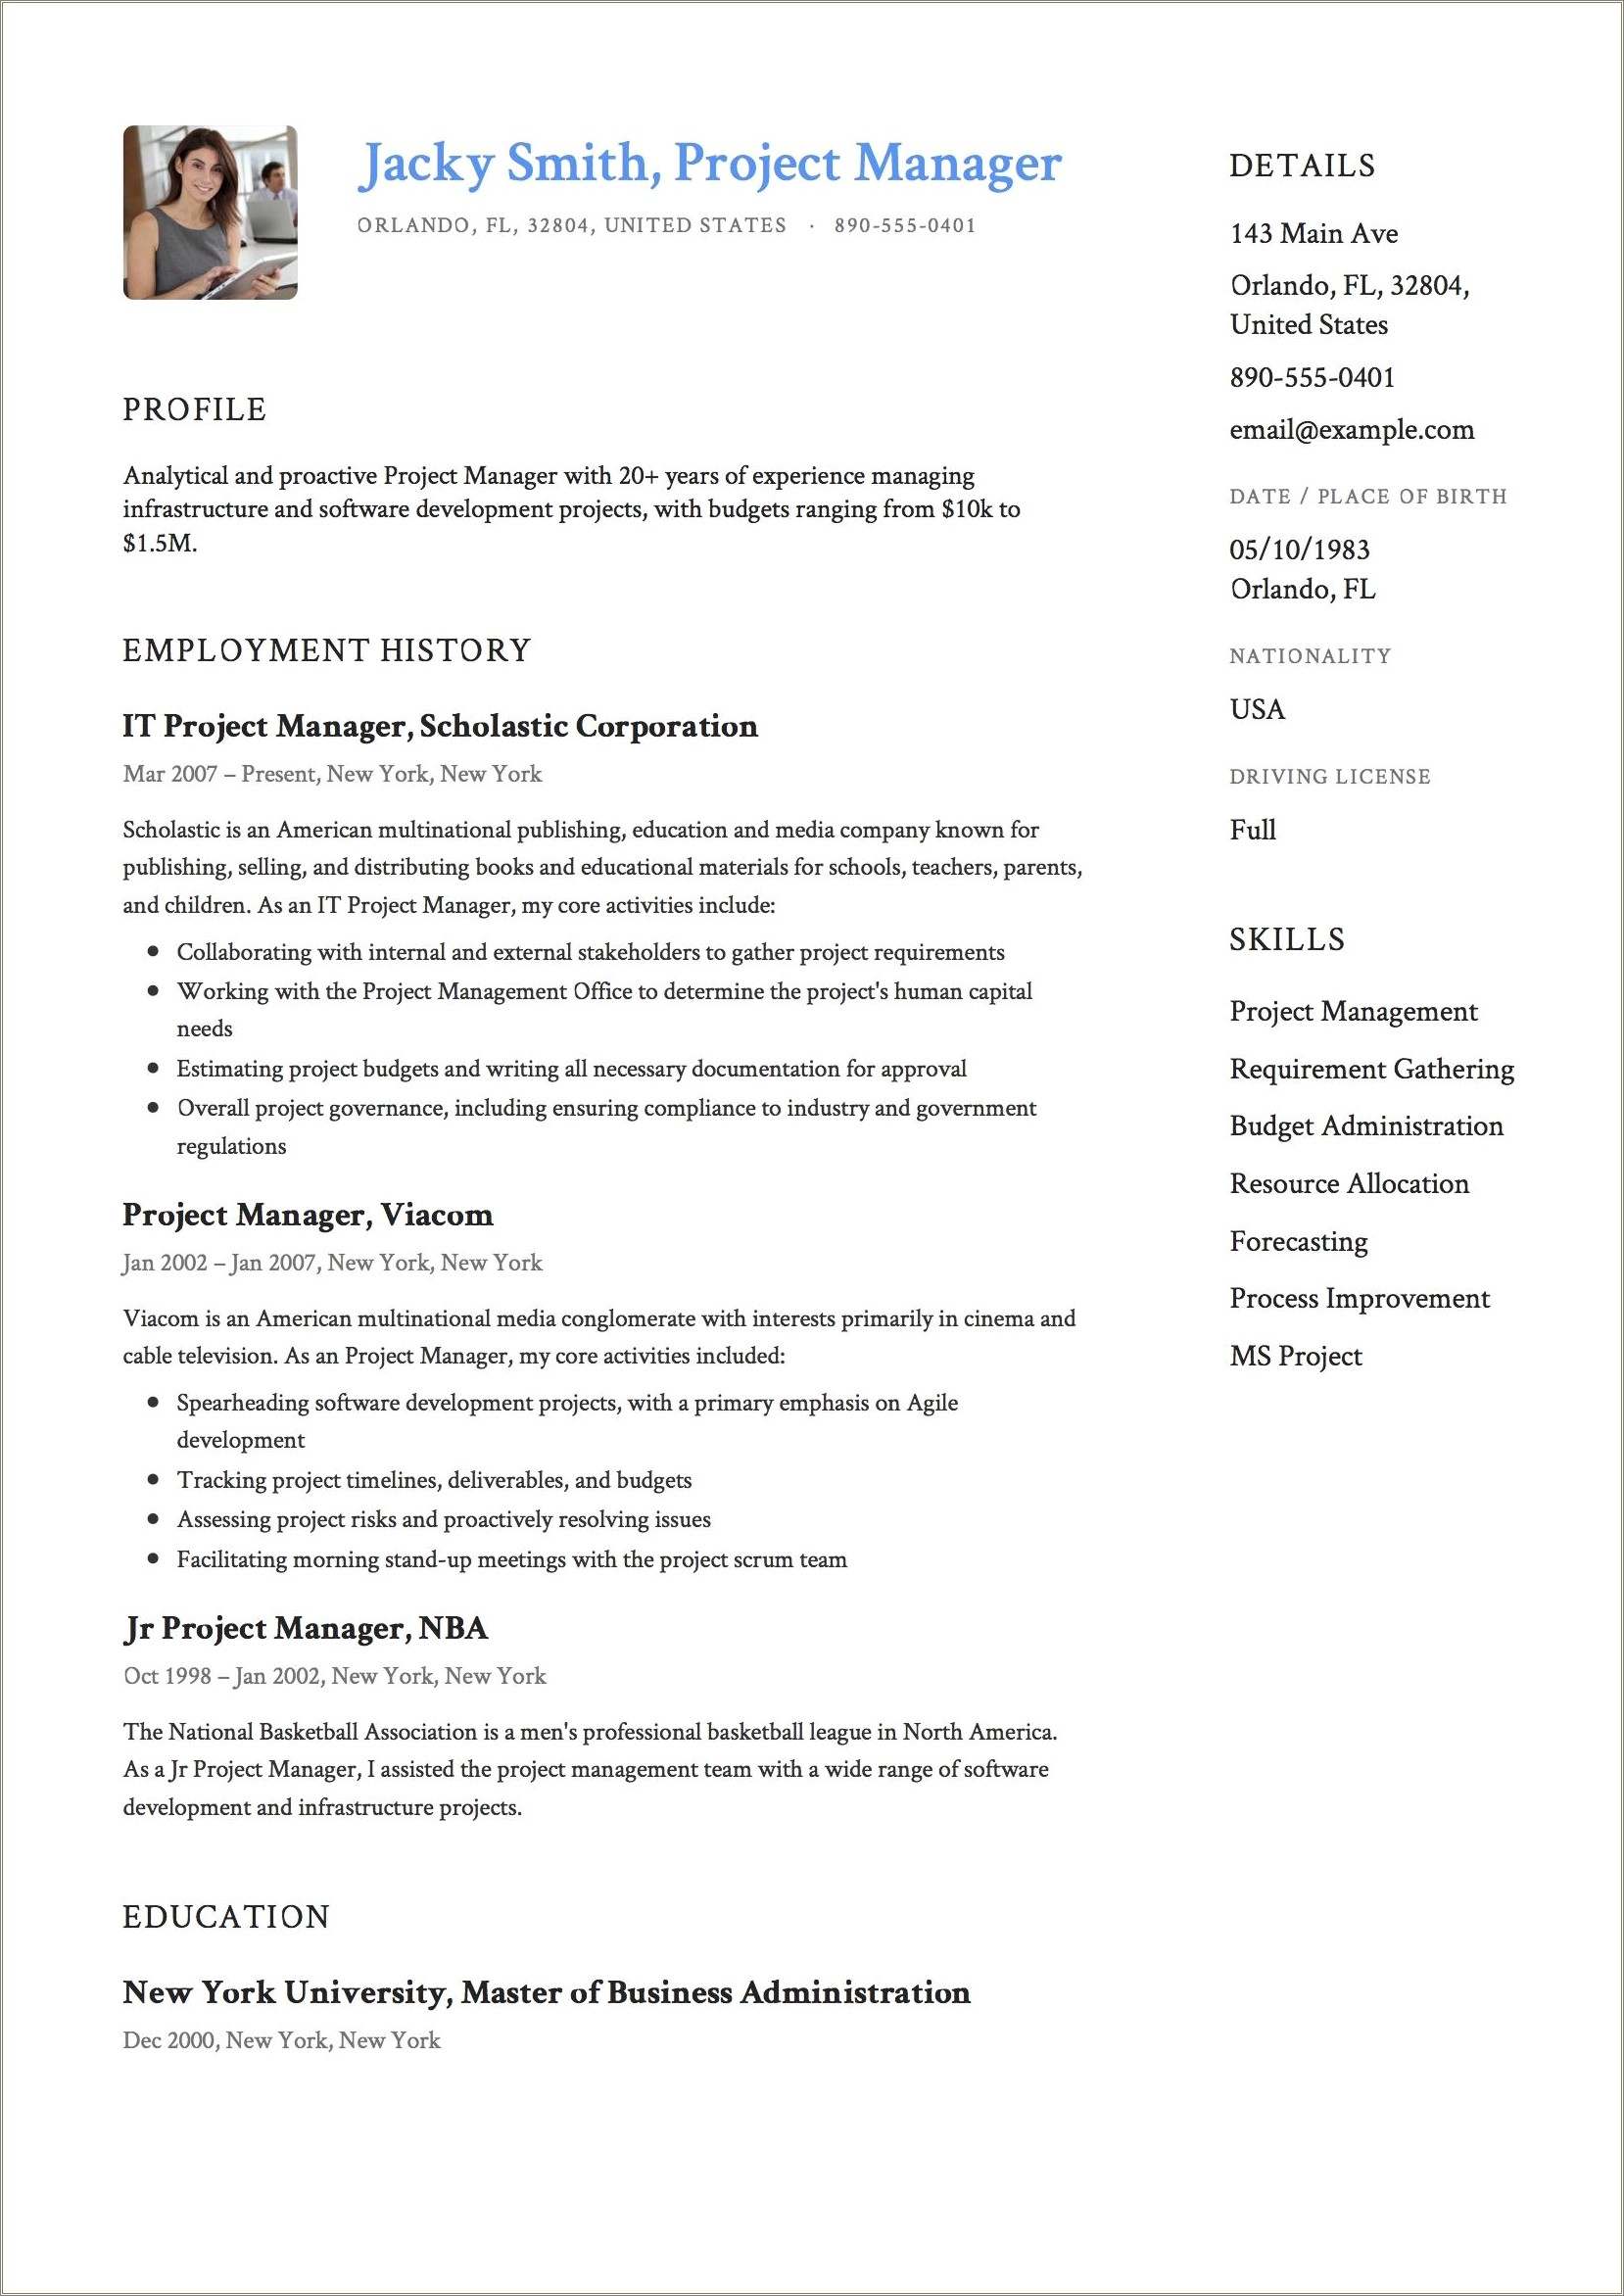 Sample Resume Assistant Project Manager